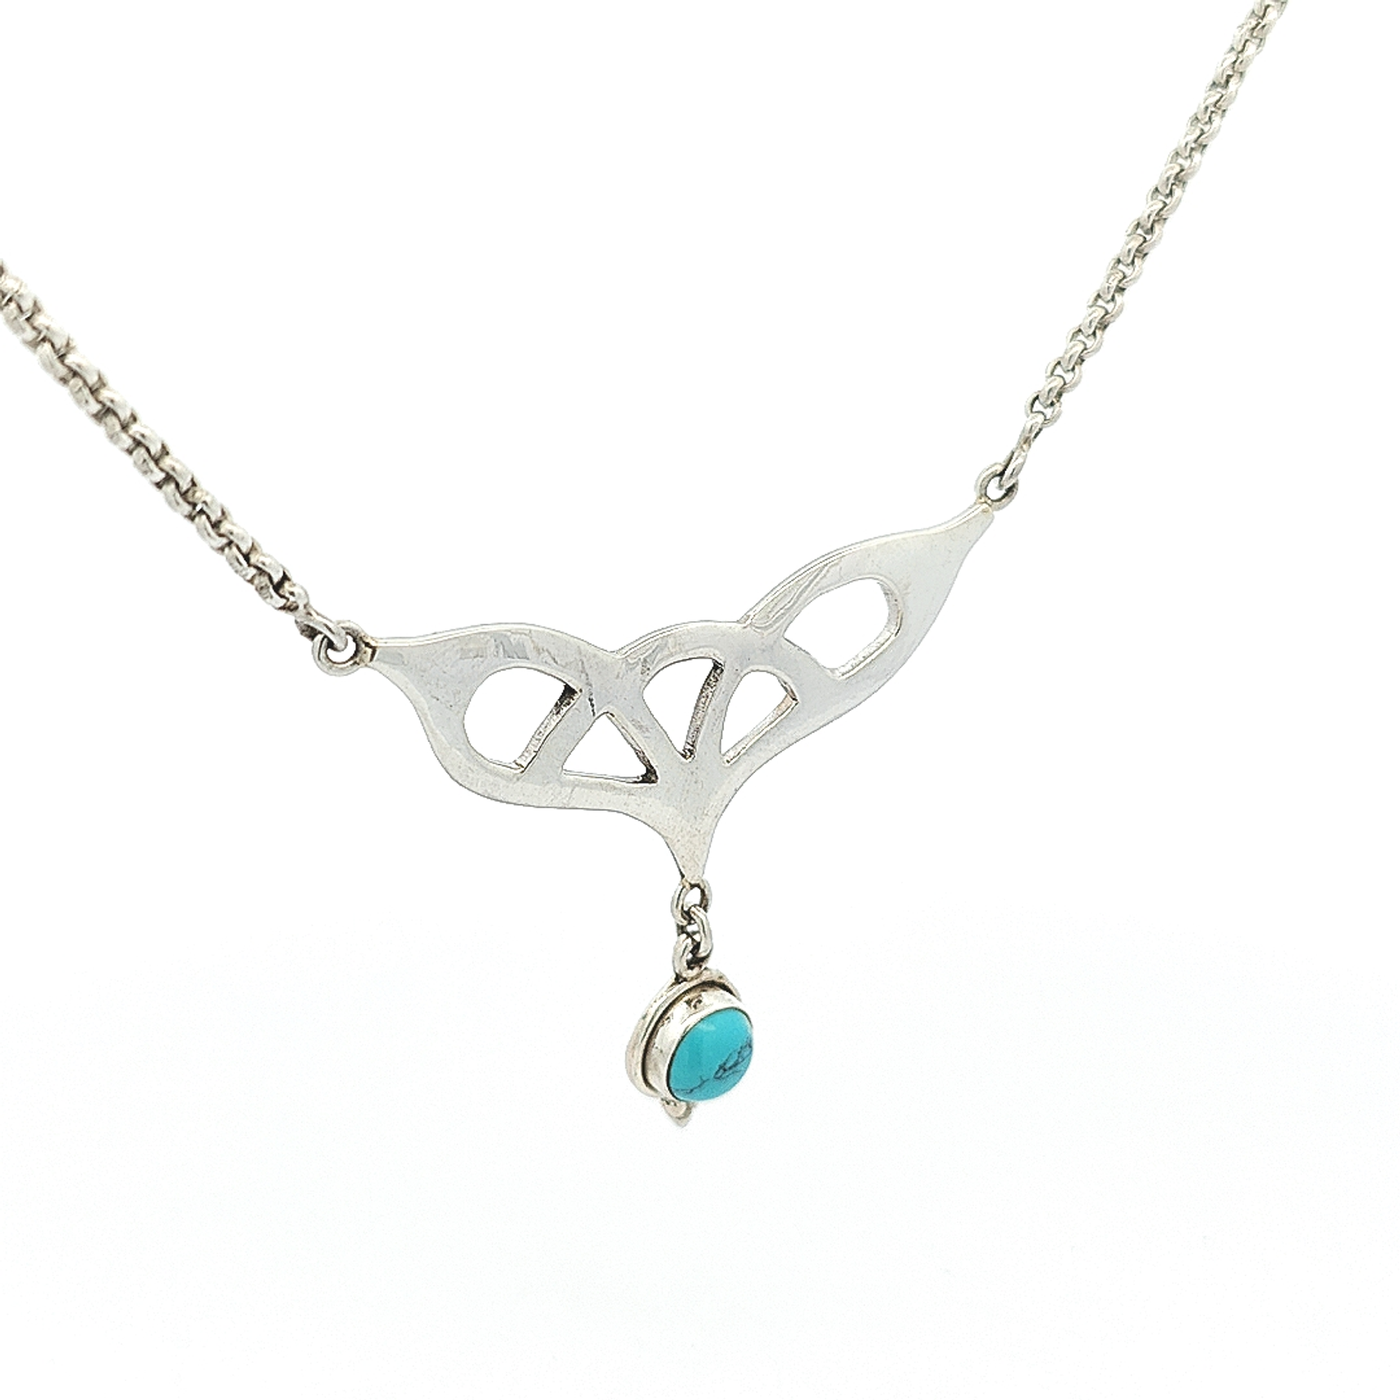 Turquoise Pendant Necklace - Corinne - boothandbooth